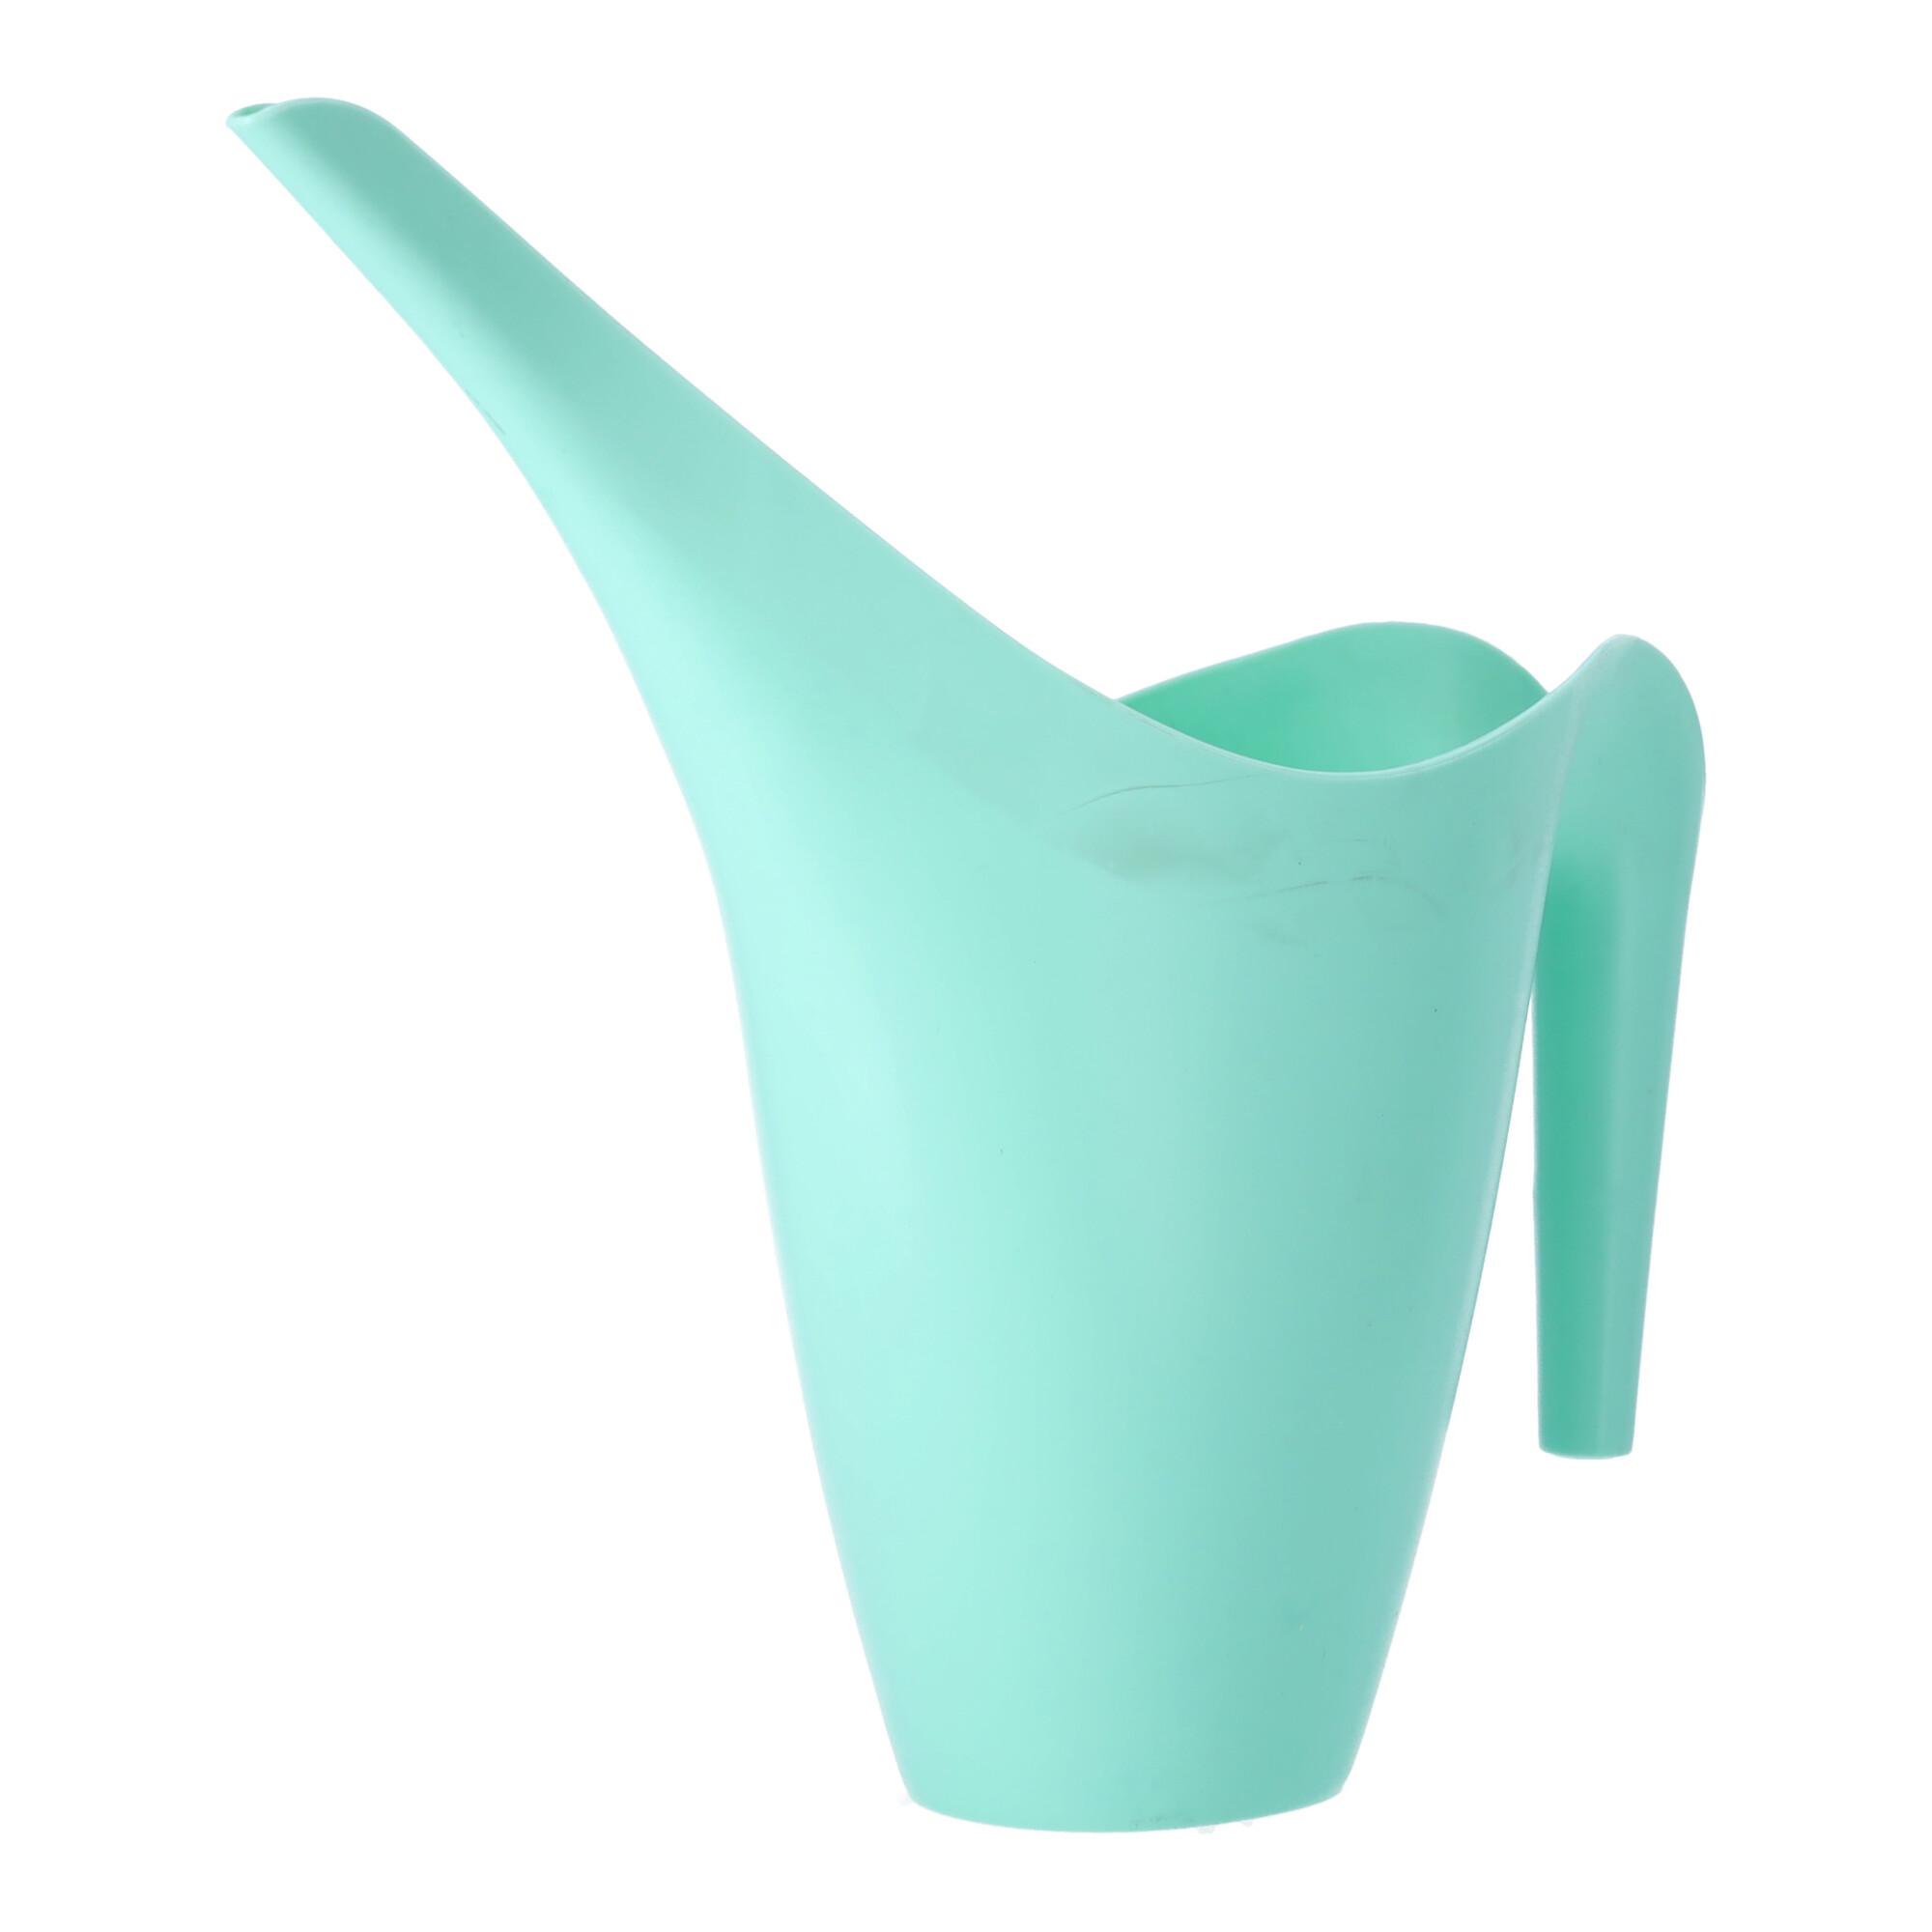 Garden, home watering can 1.5 L - mint